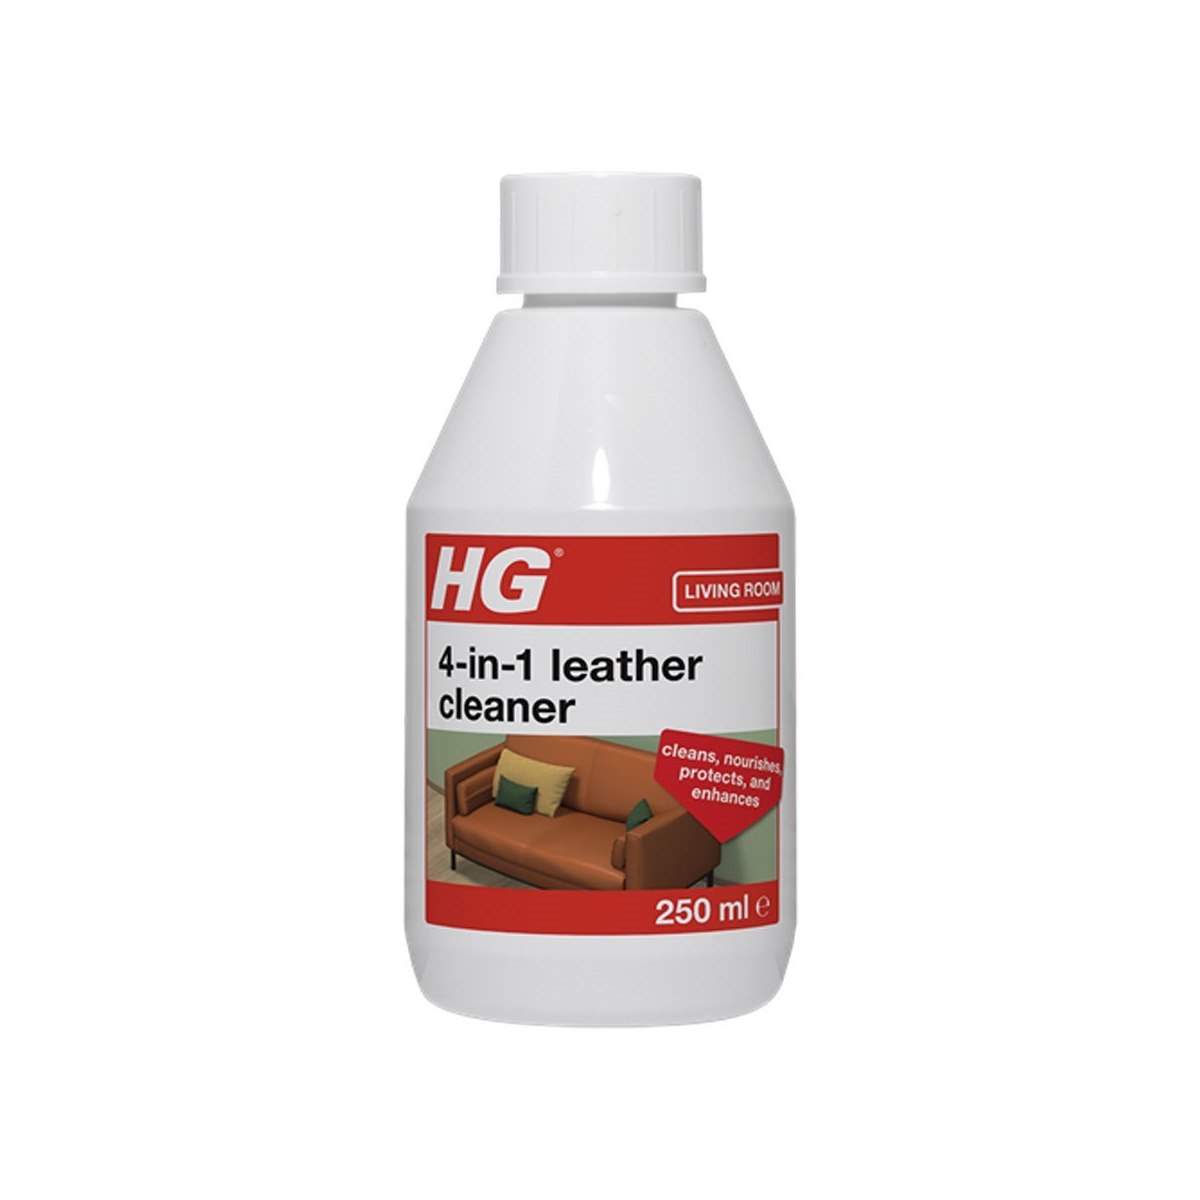 HG 4 in 1 Leather Cleaner